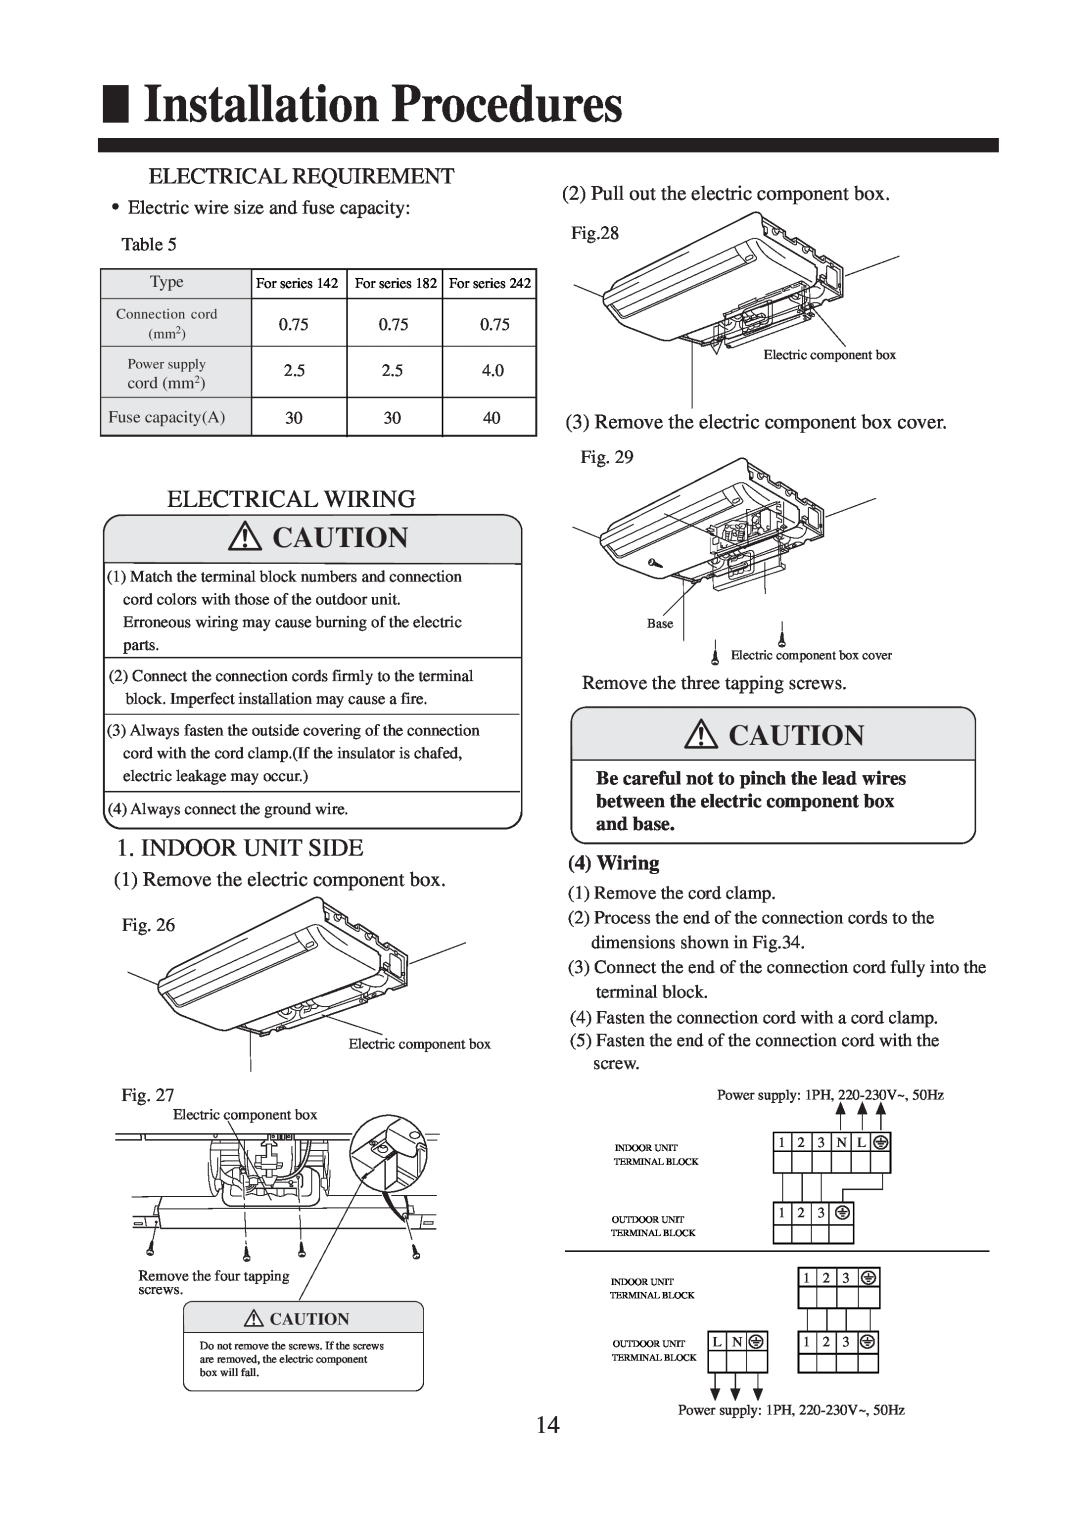 Haier AC182ACEAA, AC142ACERA Installation Procedures, Electrical Wiring, Indoor Unit Side, Electrical Requirement 